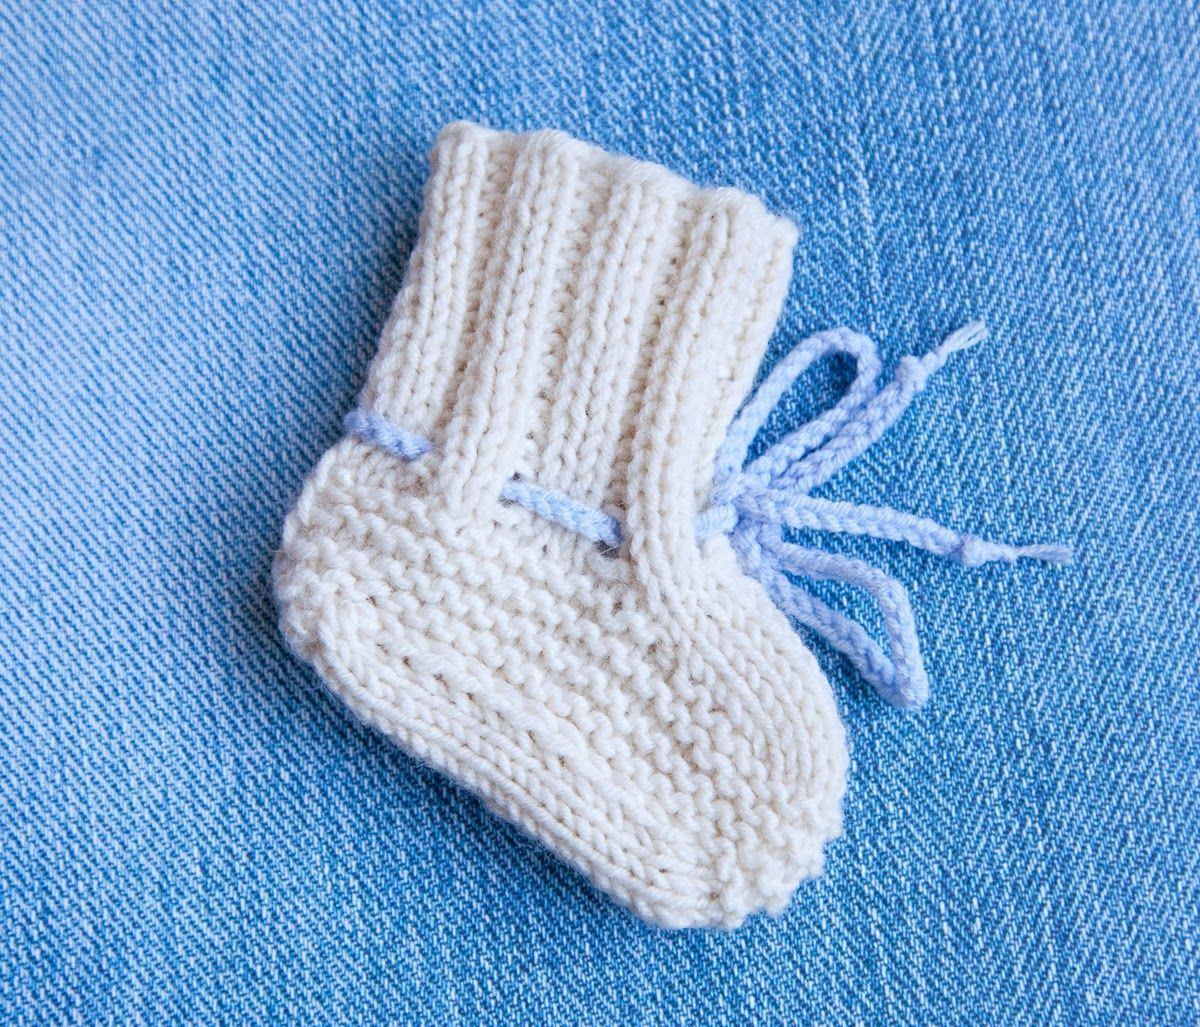 Baby Booties Pattern Knit Free Ba Booties Pattern Ugg Knitting Directions For Knit Empoto